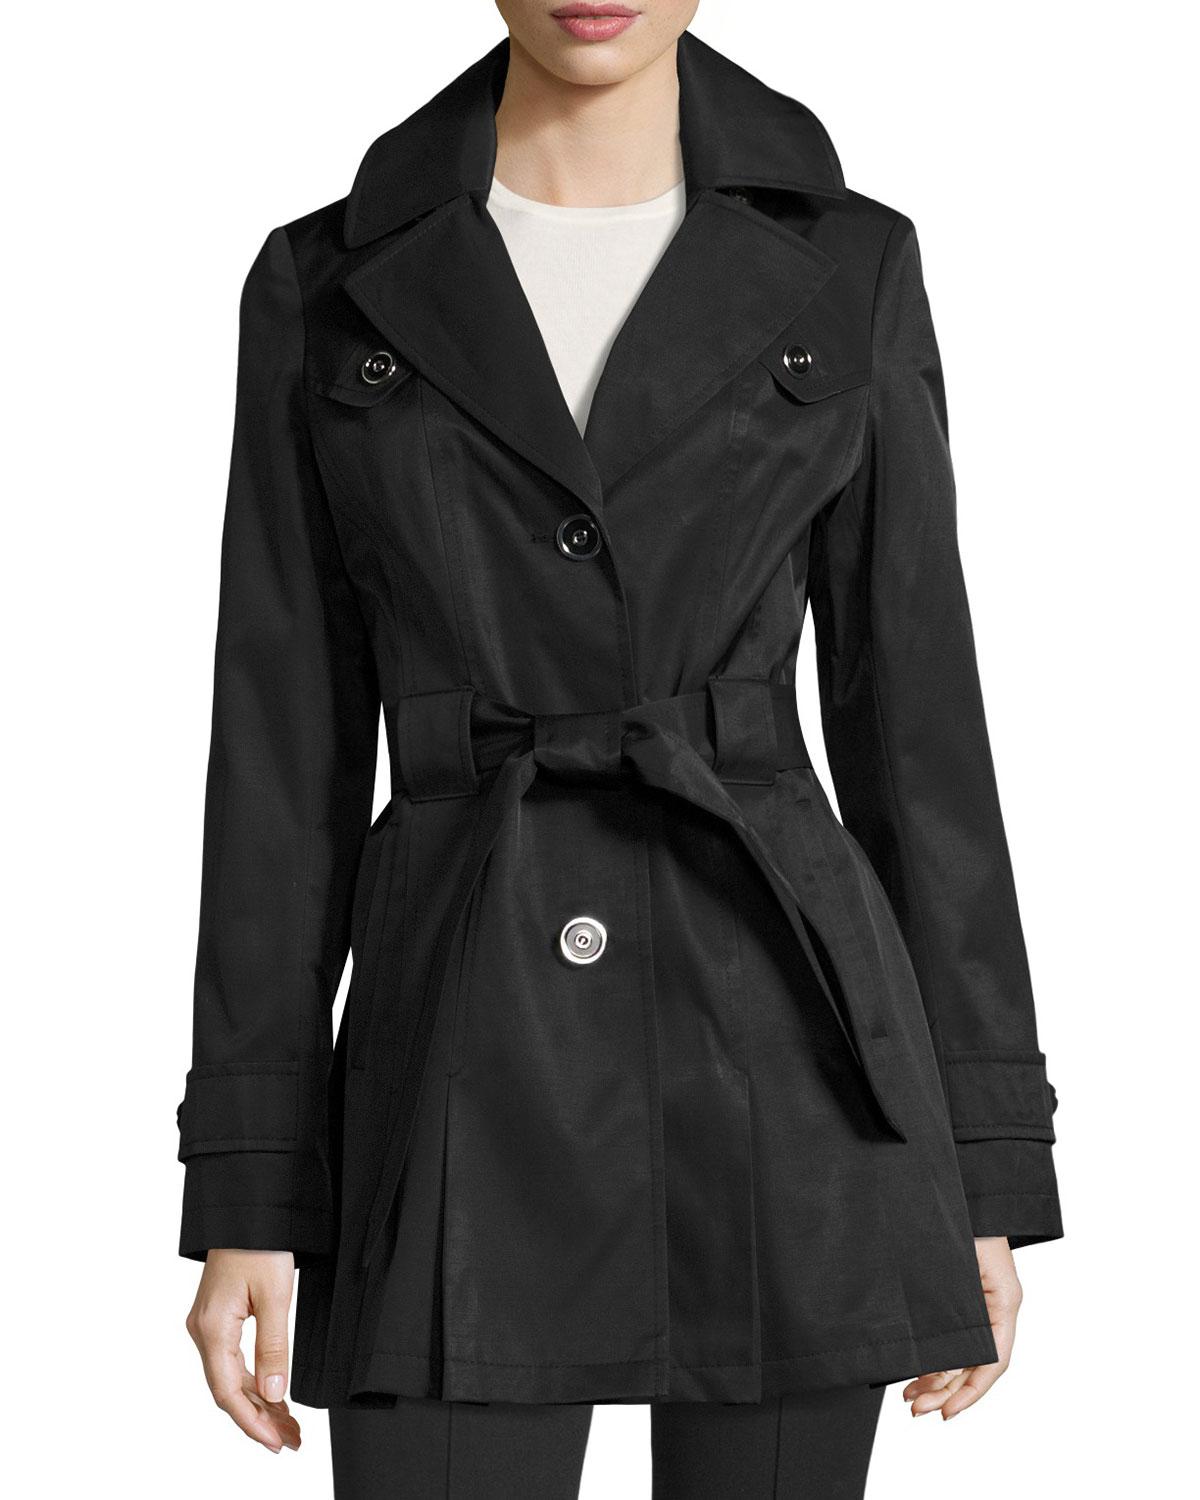 Via Spiga Cotton Water-resistant Belted Trench Coat in Sand (Black) - Lyst